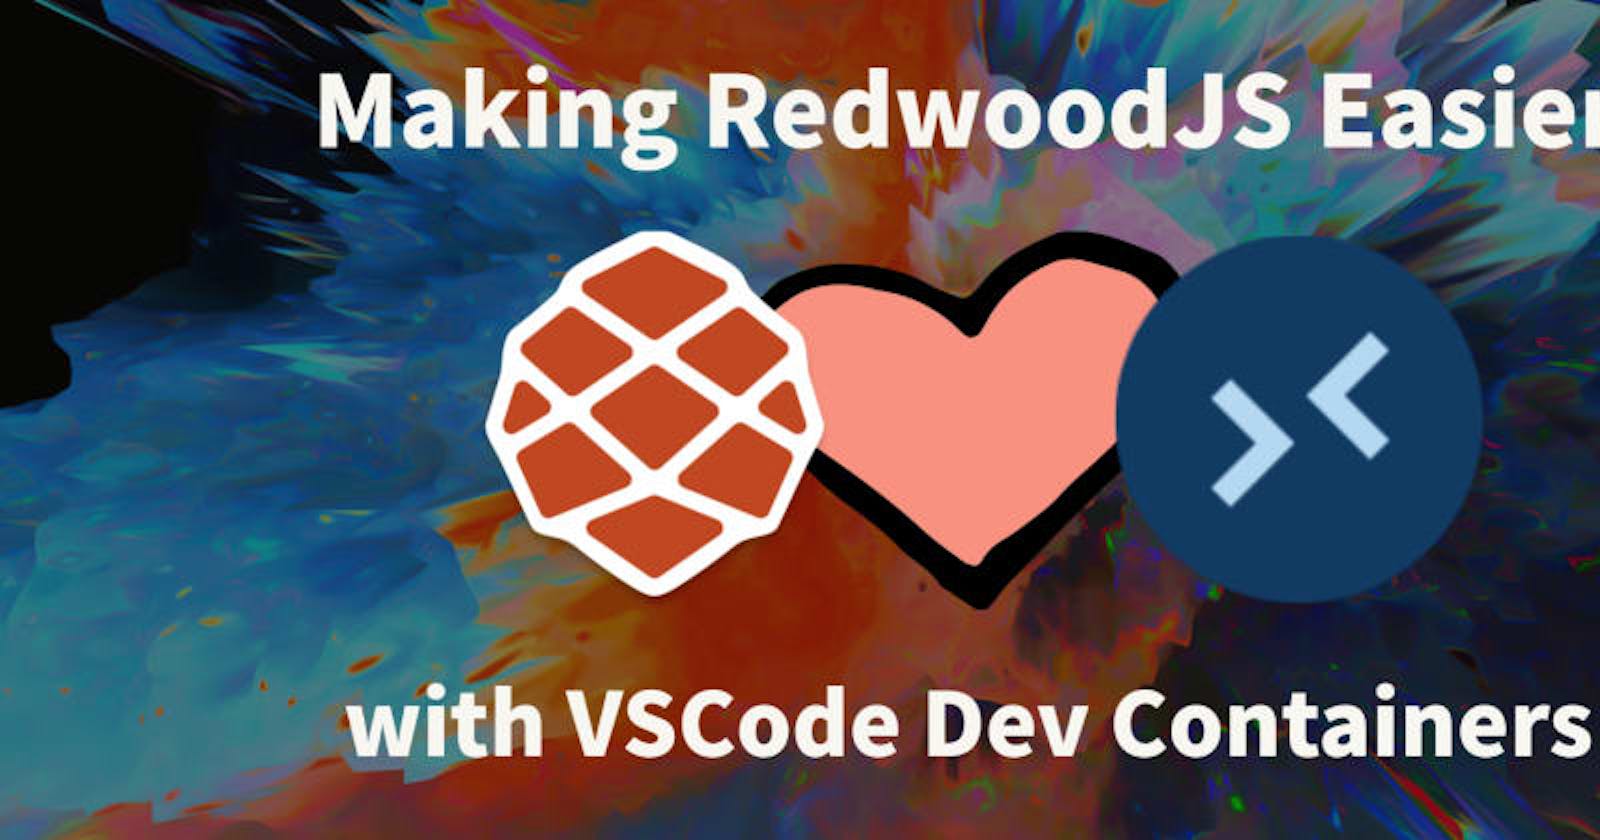 Making RedwoodJS Easier with VSCode Dev Containers